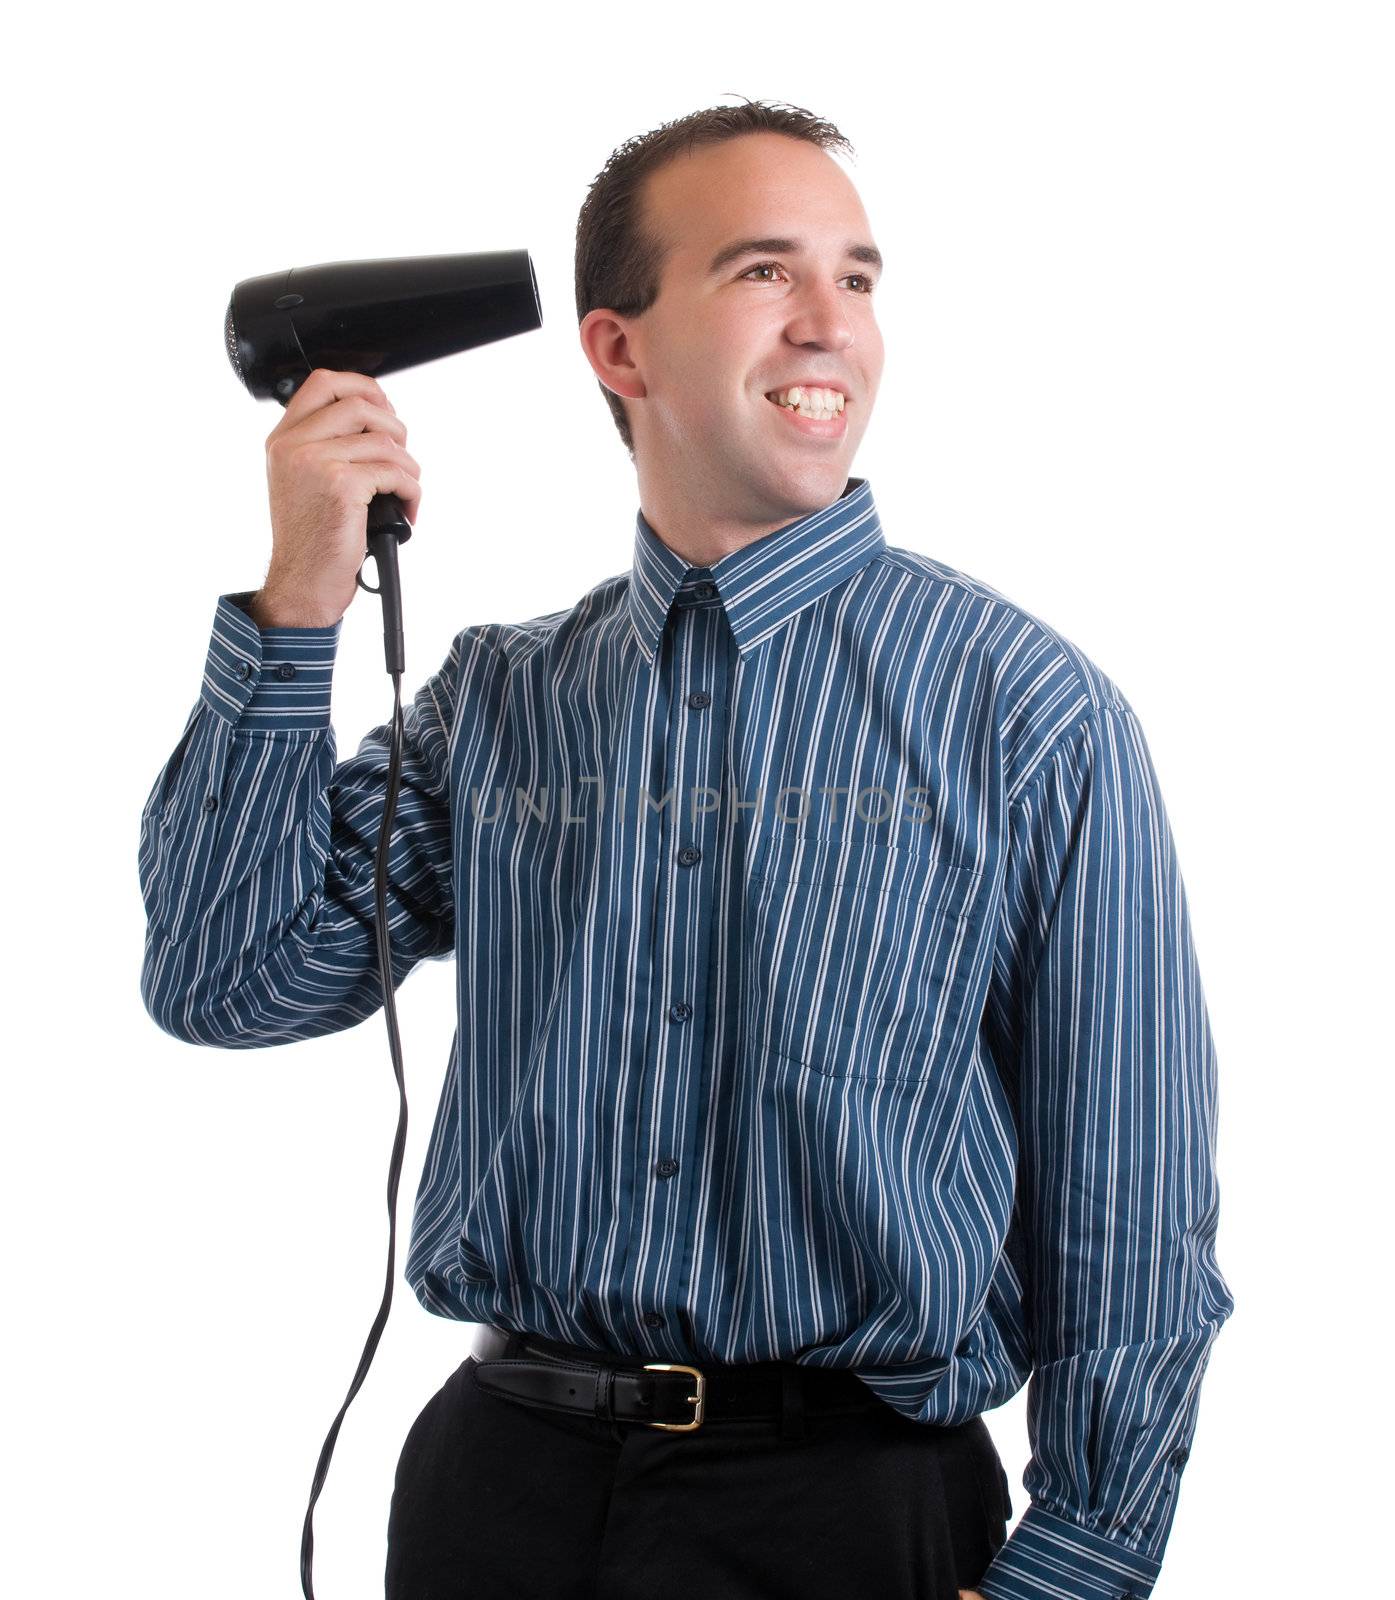 A smiling young man dressed for work and using a hot air dryer, isolated against a white background